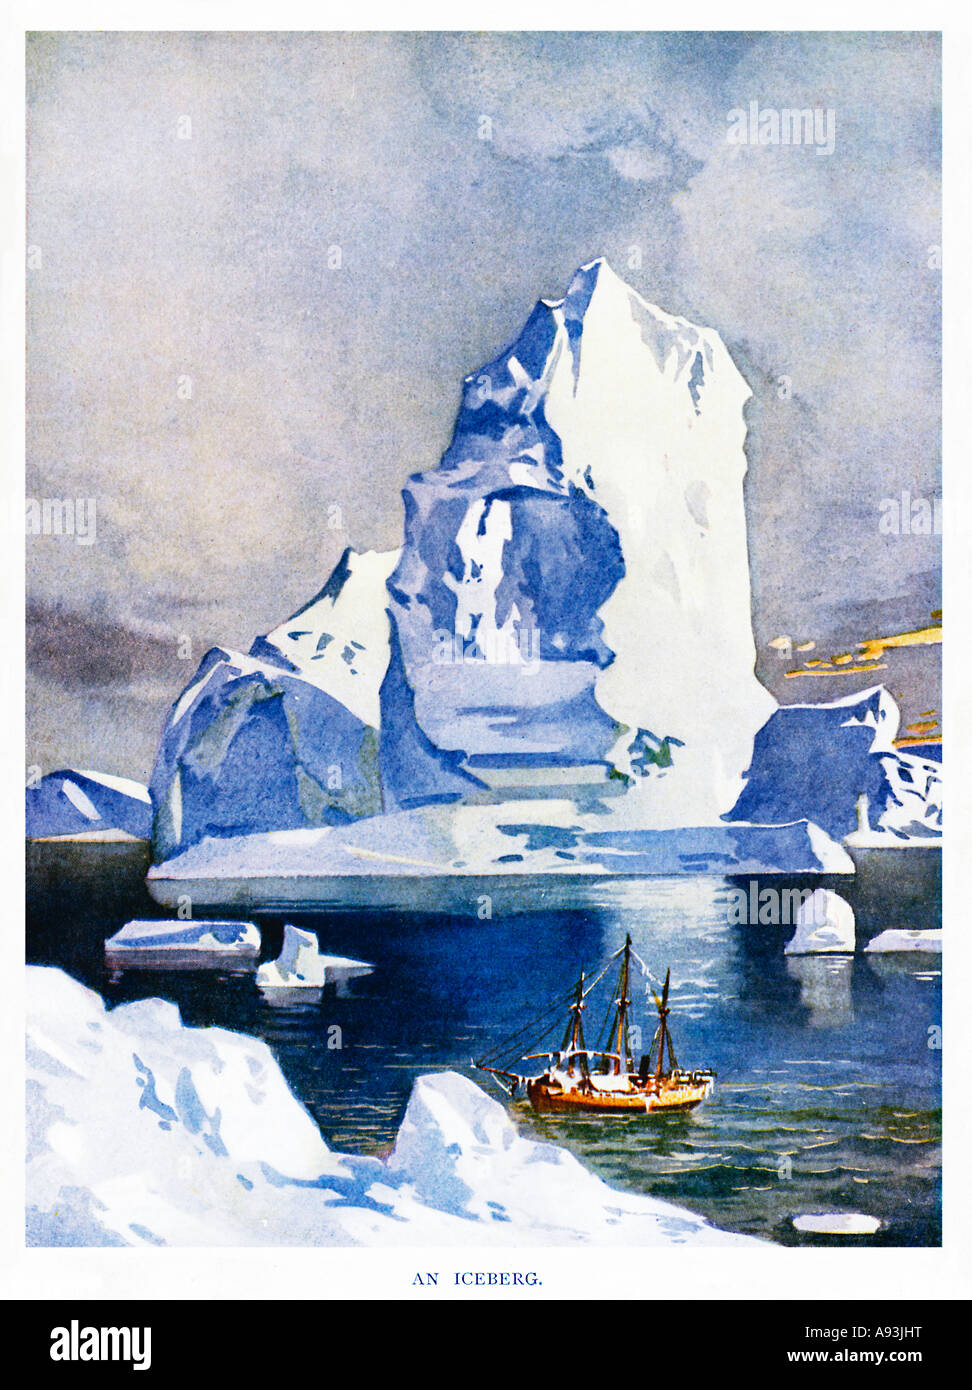 An Iceberg dwarfs a ship in this 1920s English magazine illustration of a whaler in the Antarctic ocean Stock Photo